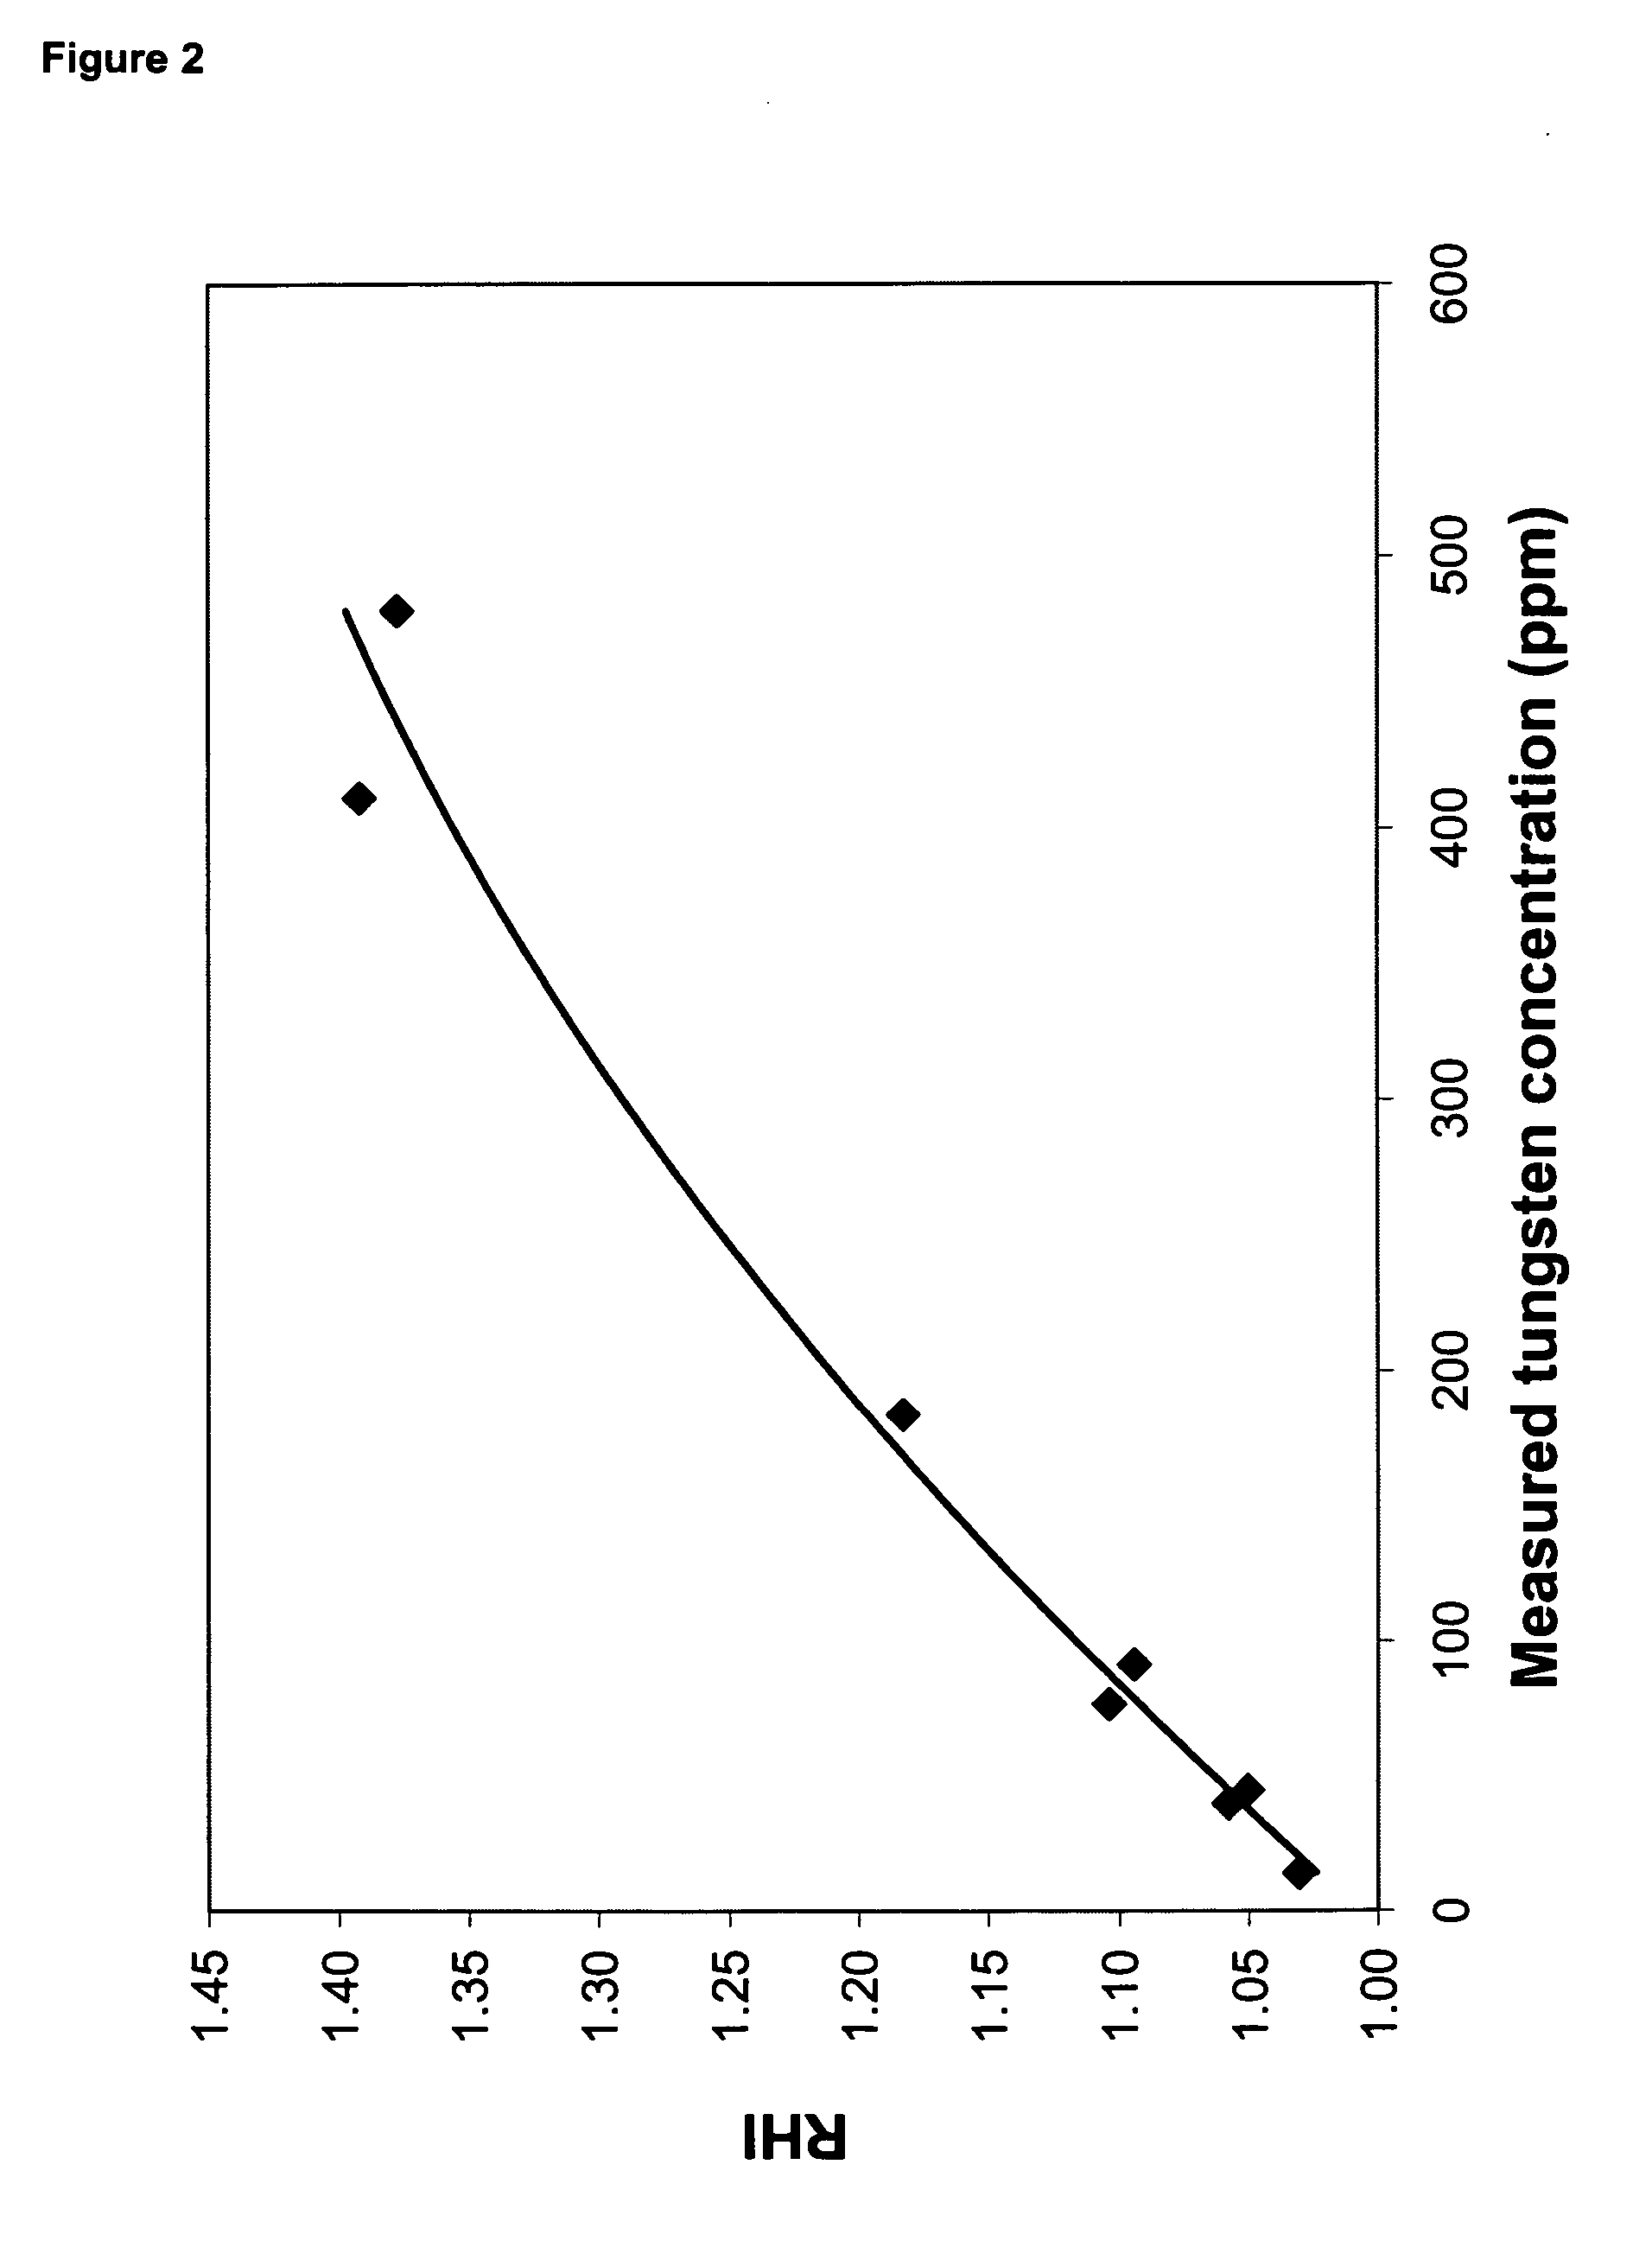 Polyester polymer and copolymer compositions containing metallic tungsten particles